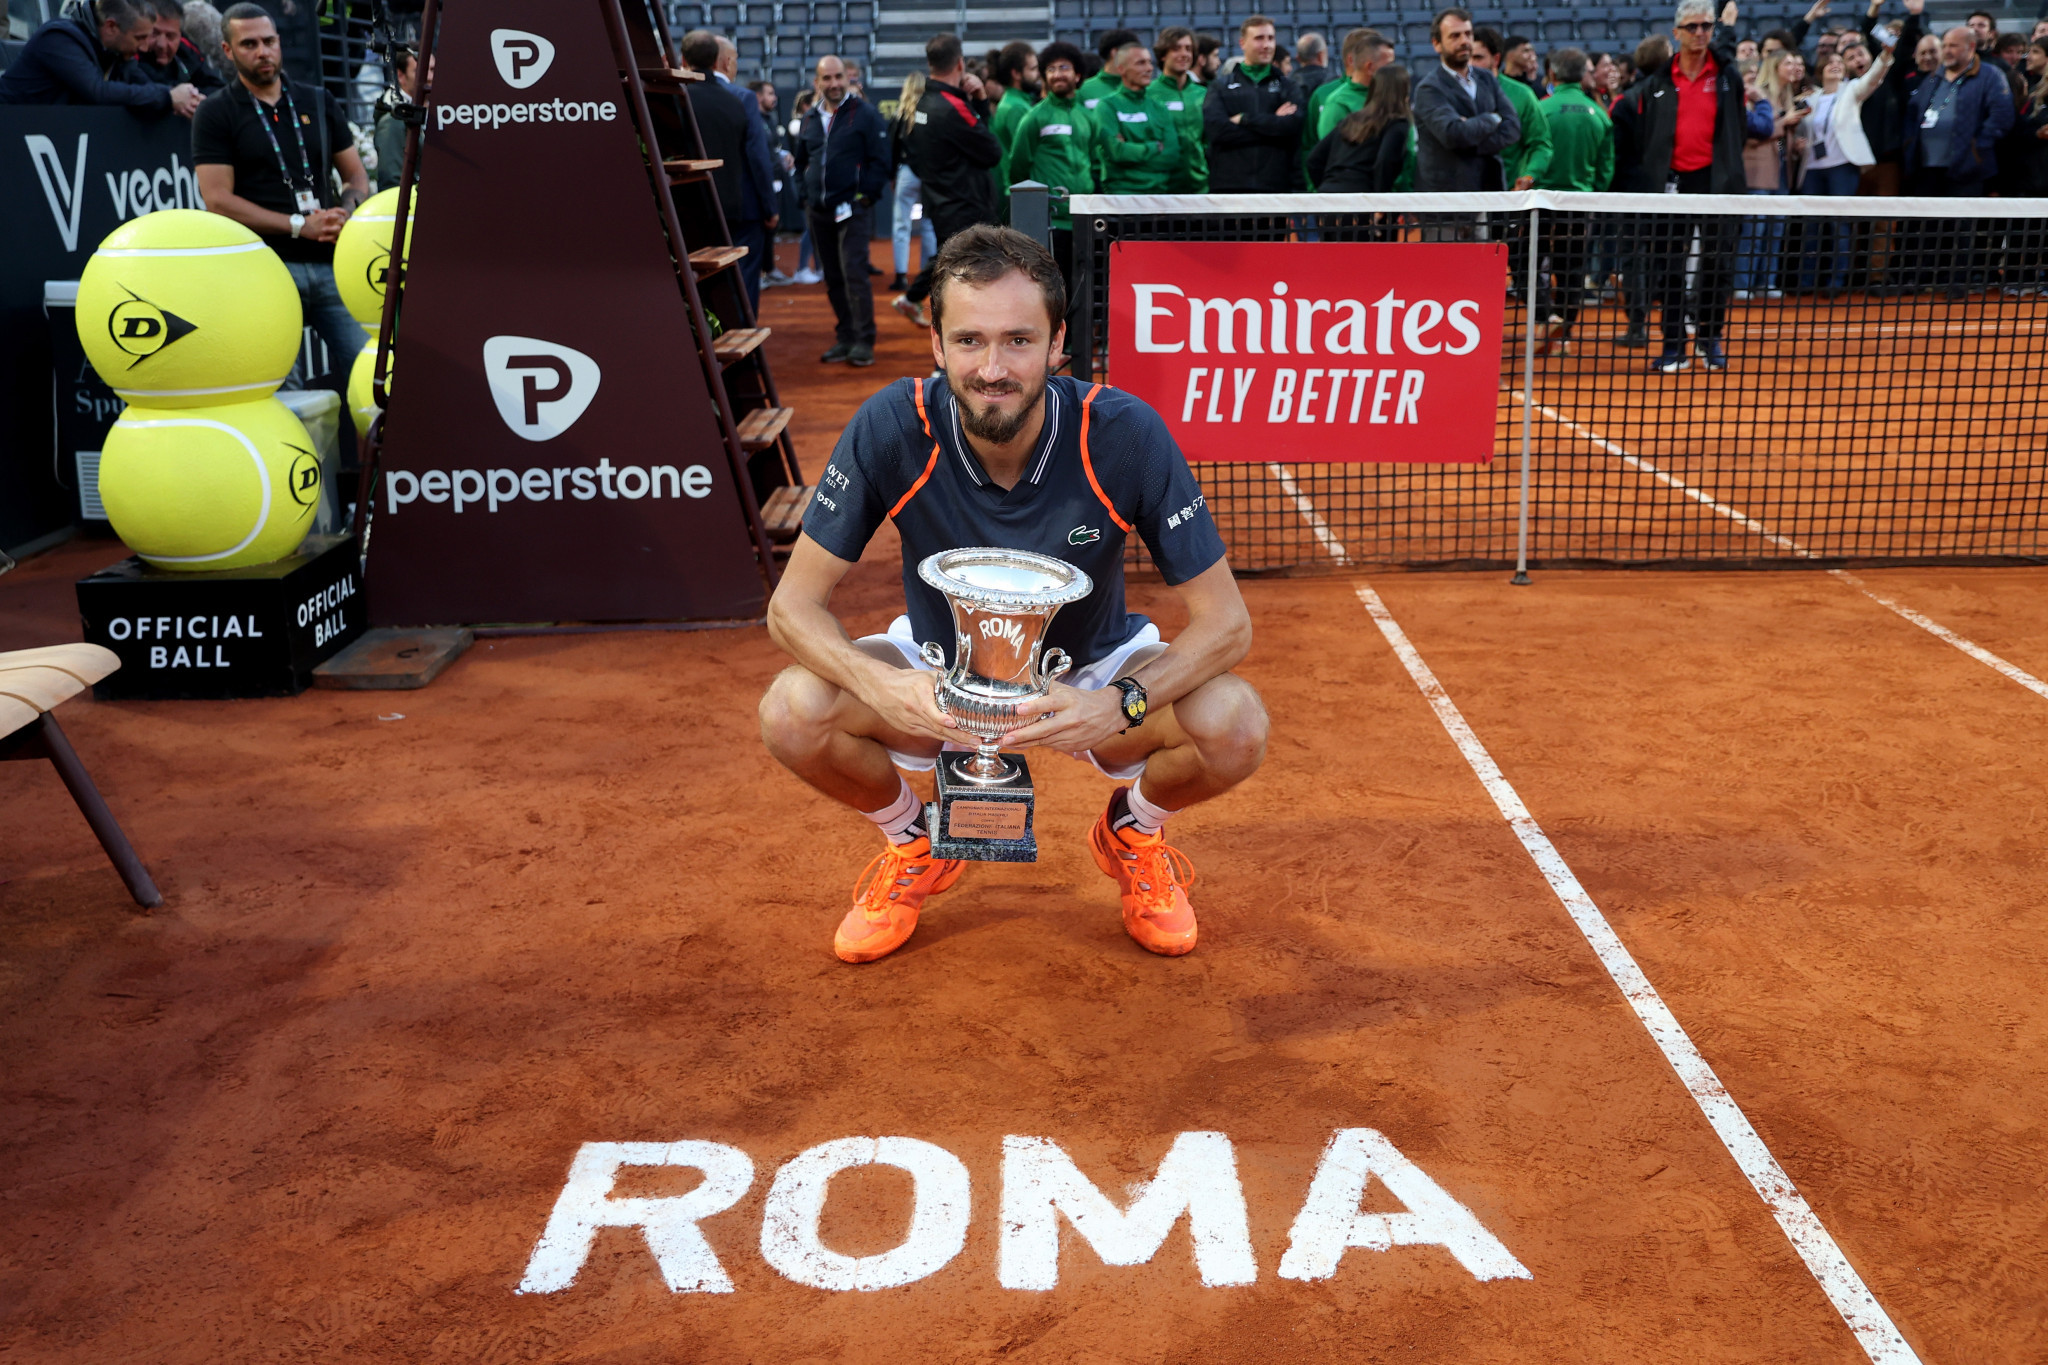 Russian neutral Daniil Medvedev, a former world number one, won his first ATP Masters 1000 tournament on clay in Rome ©Getty Images